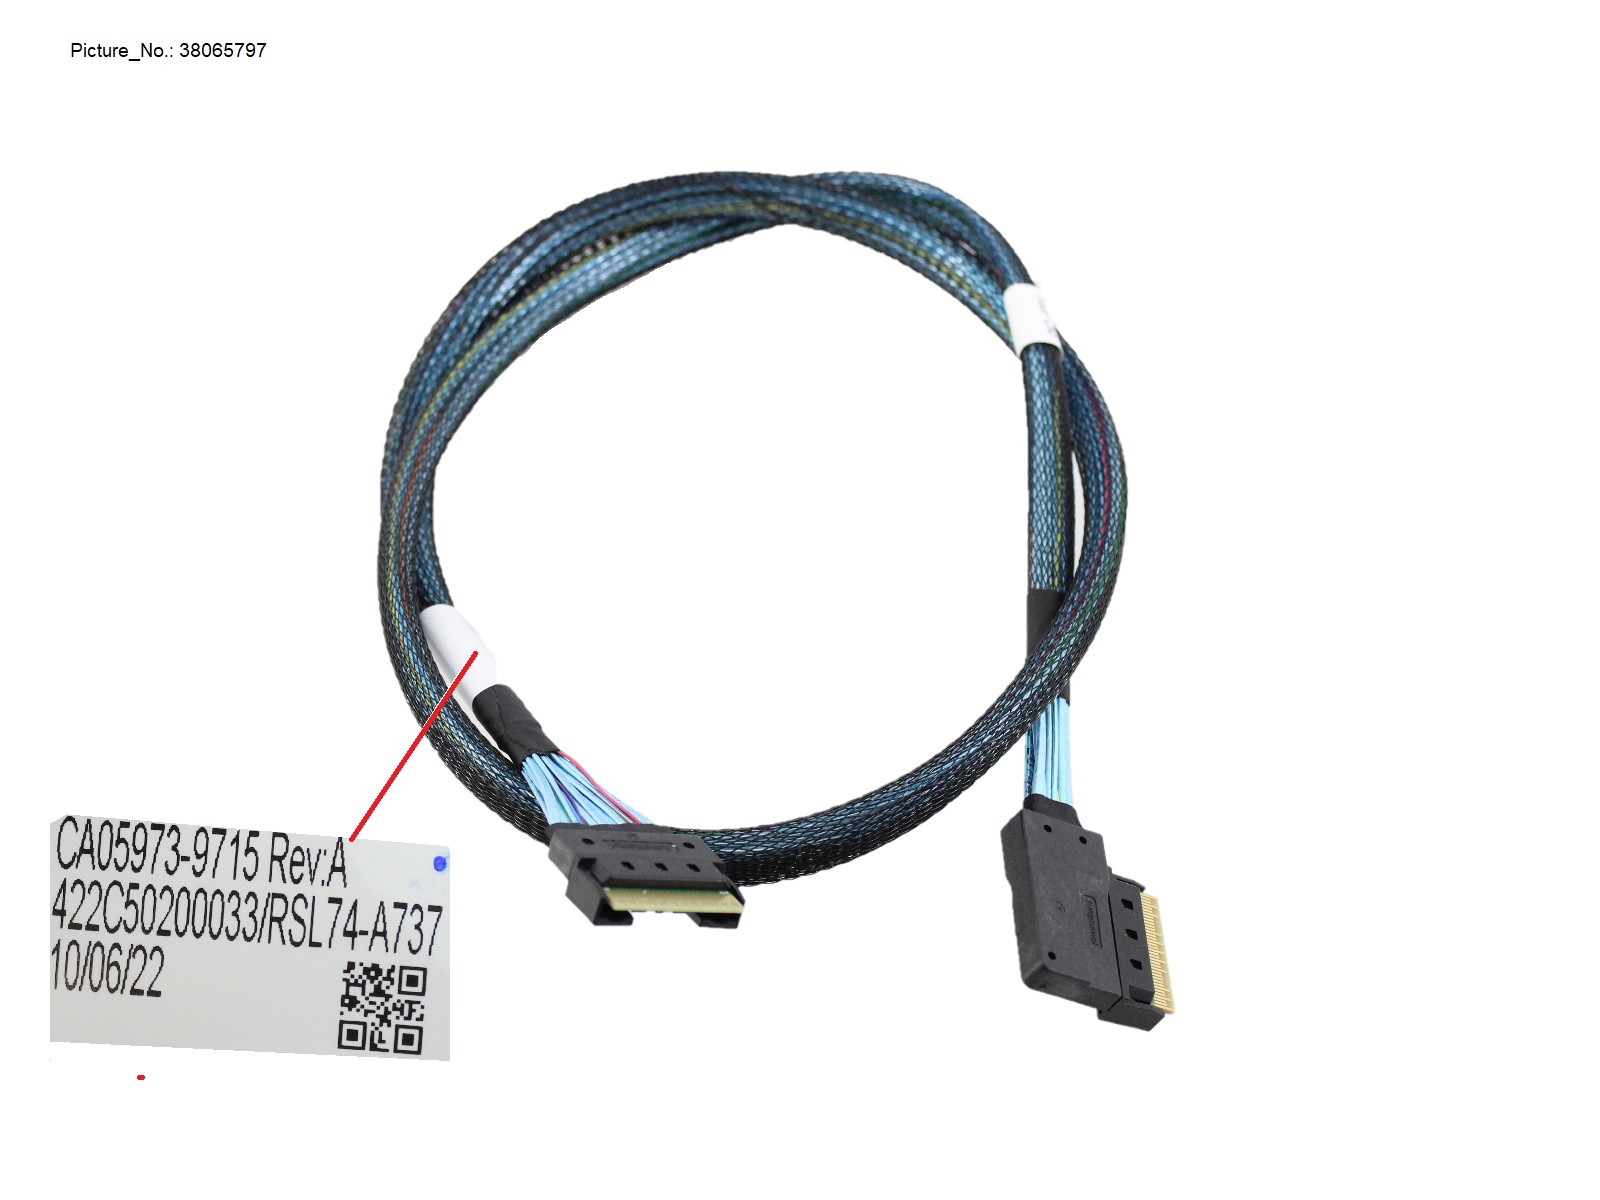 RX4770M6 8XSAS SLIMLINE CABLE FOR EP/CP6